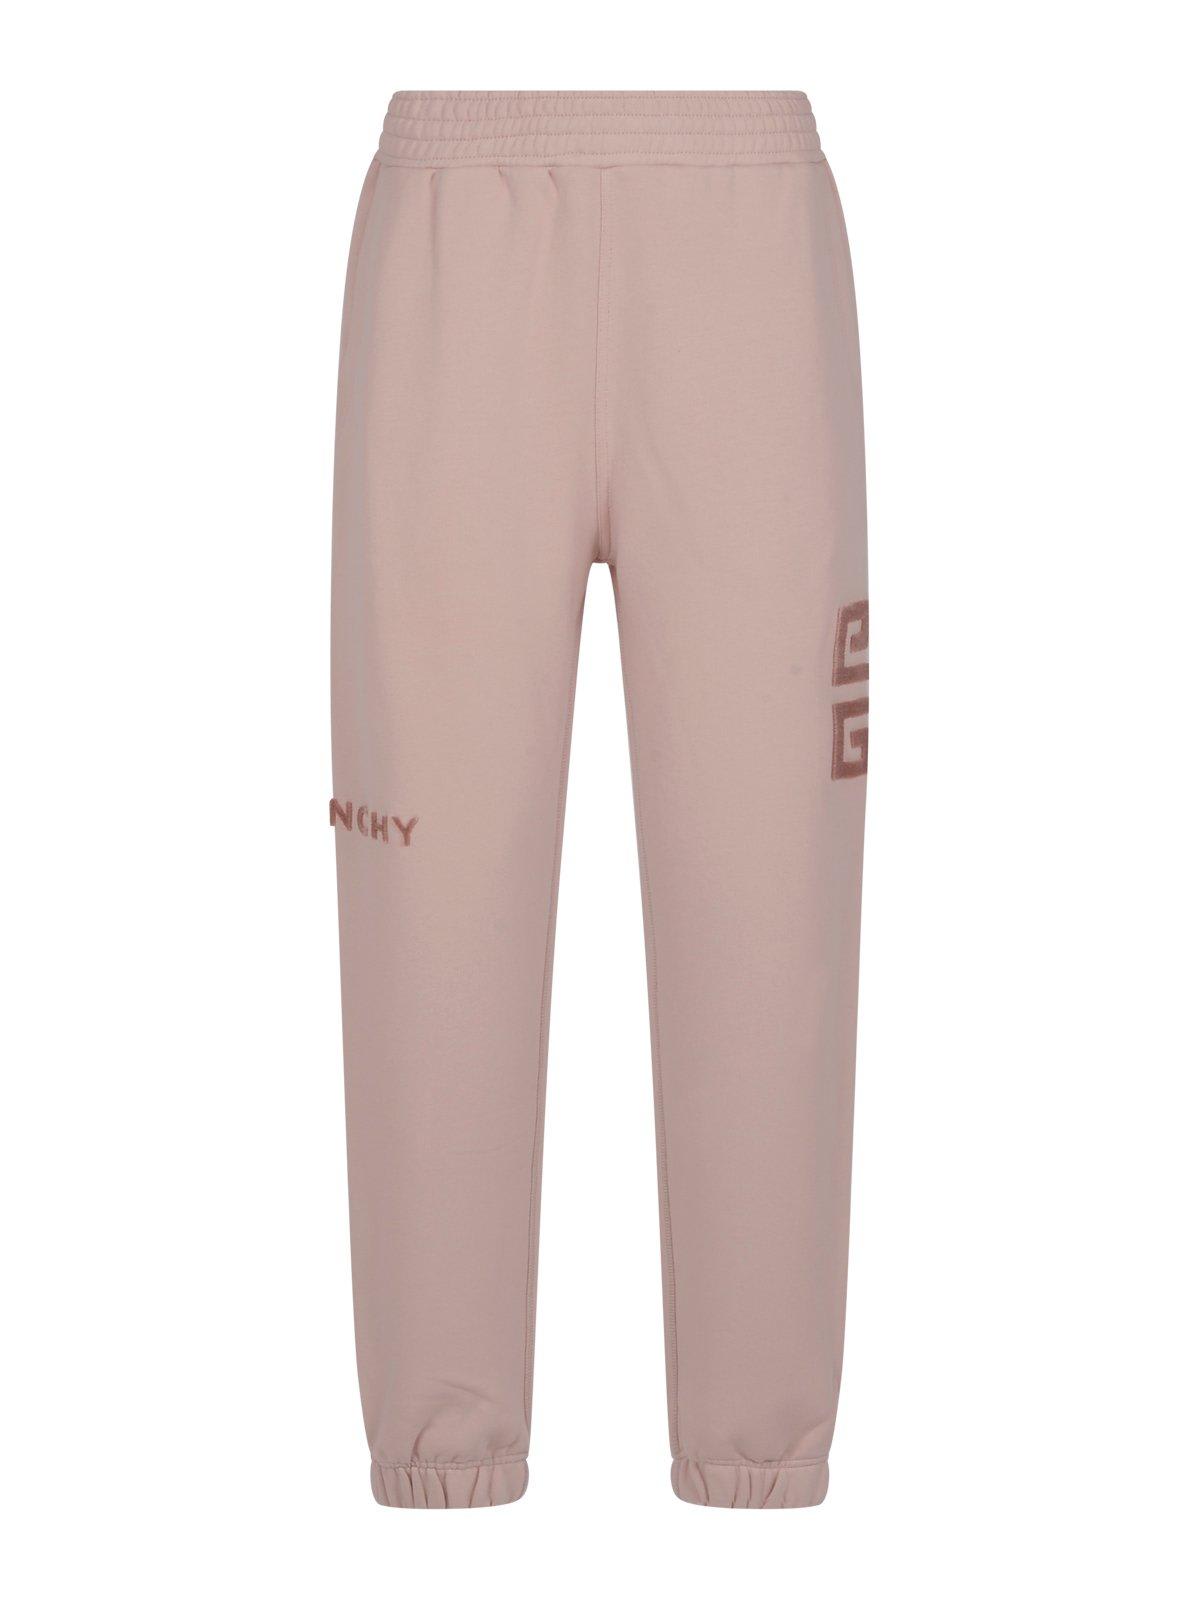 GIVENCHY LOGO EMBROIDERED SWEATPANTS